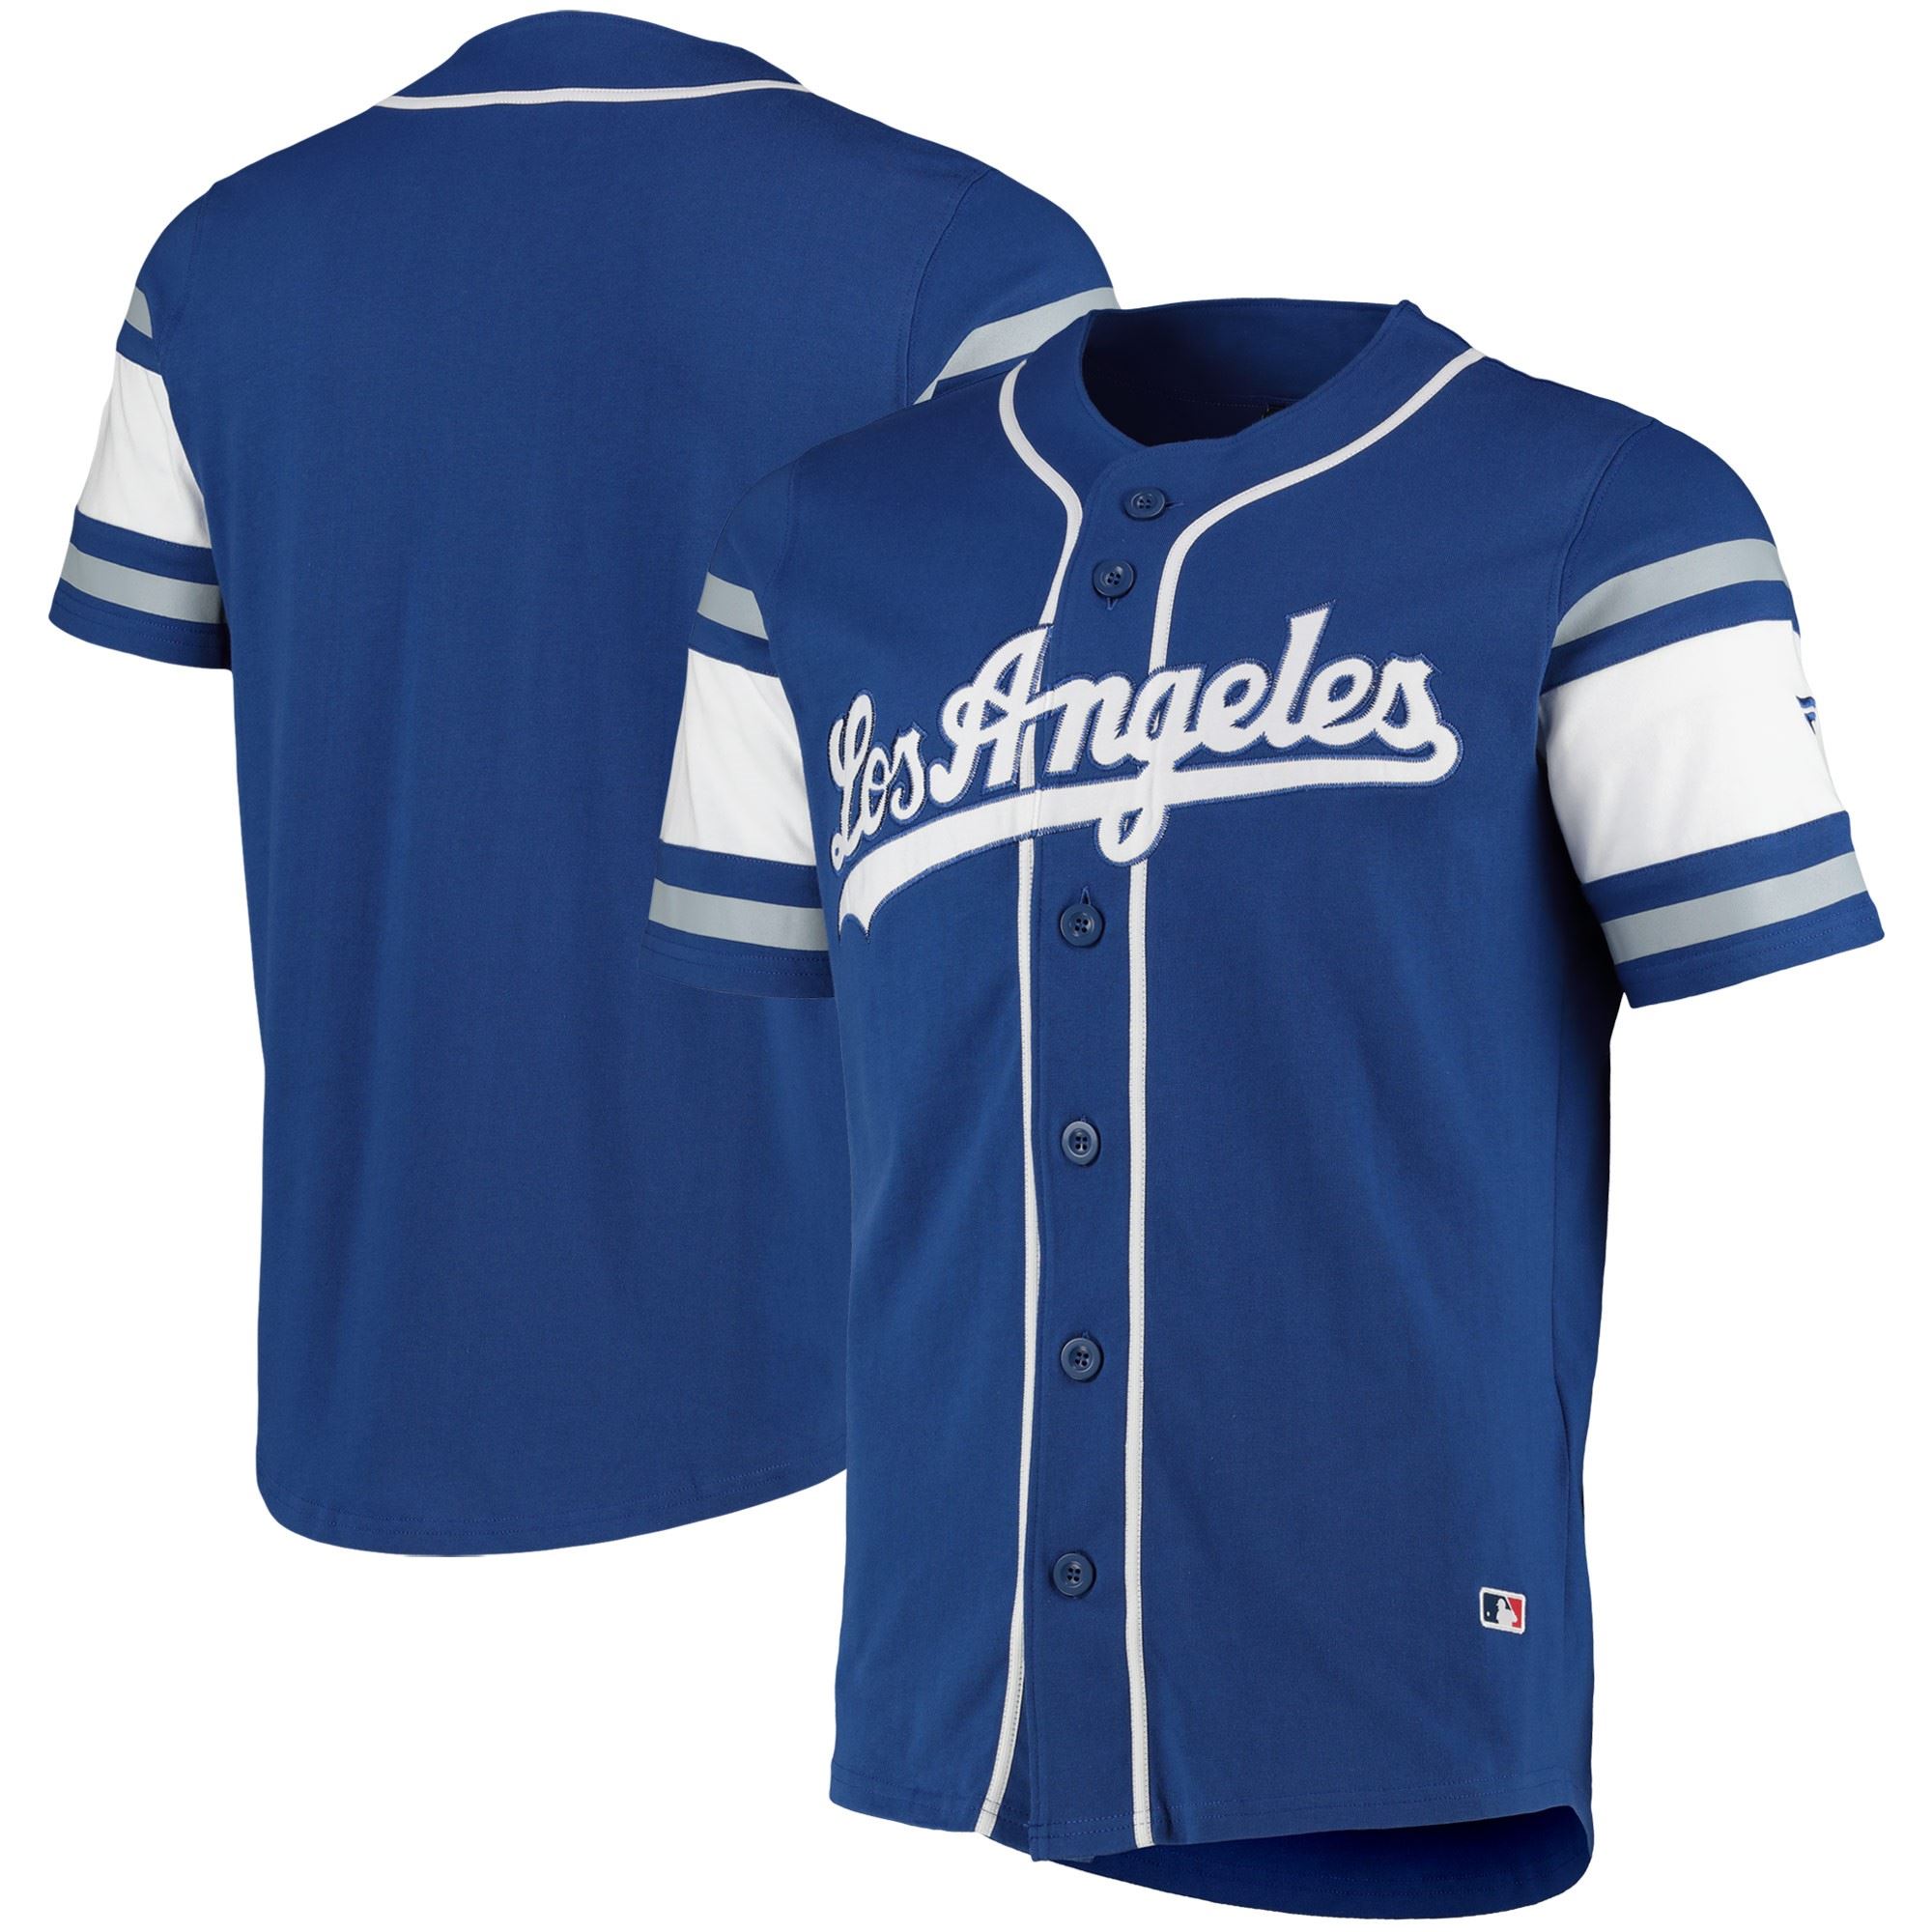 Los Angeles Dodgers MLB Cotton Supporters Jersey Fanatics